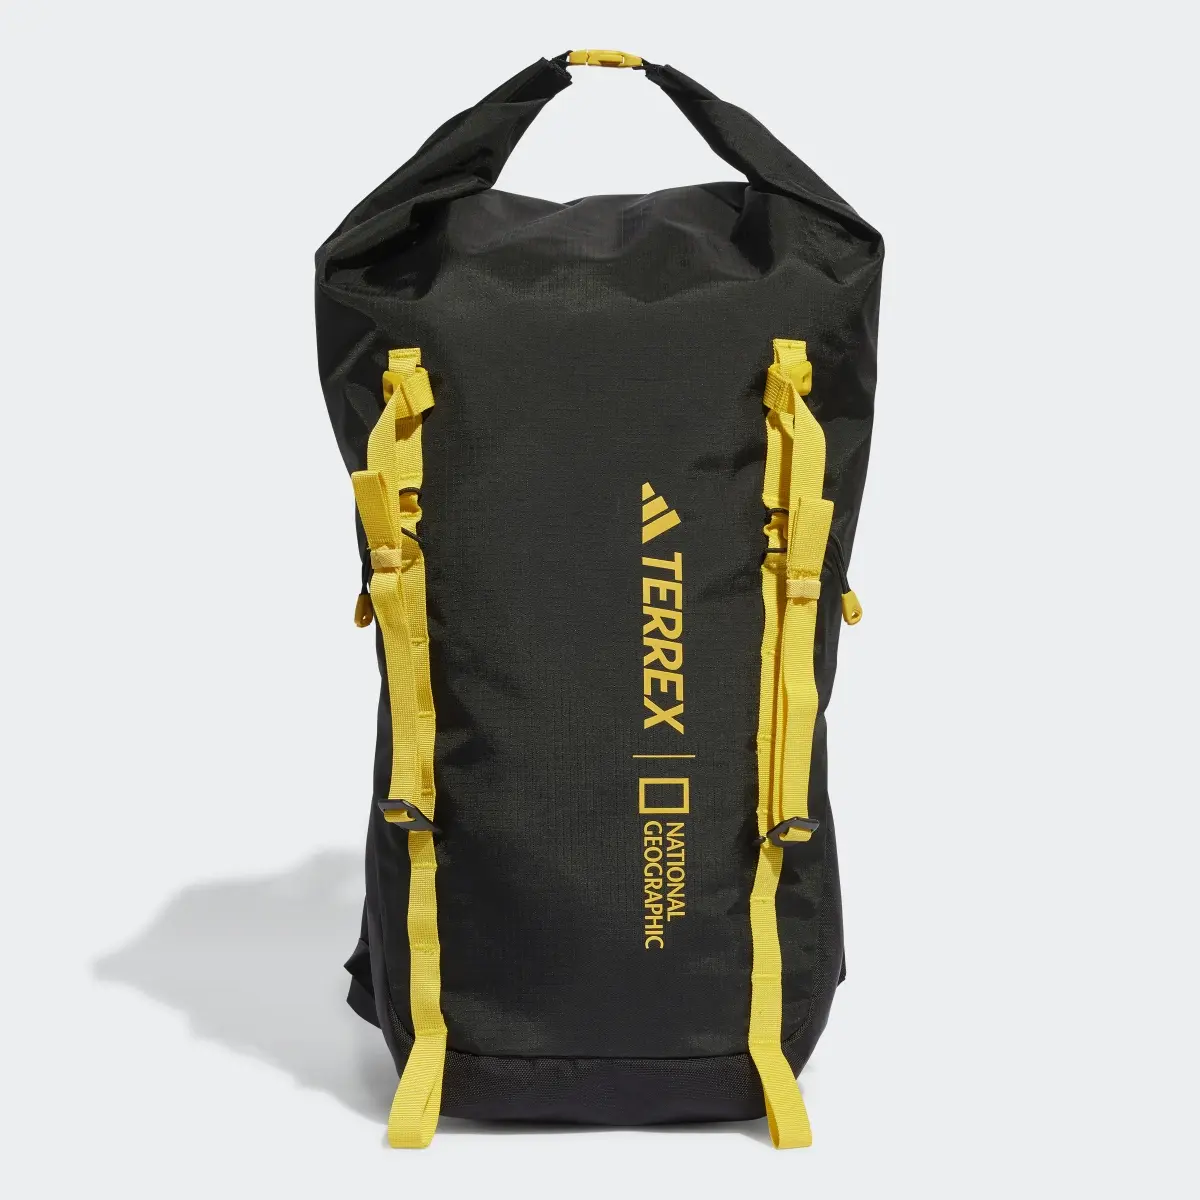 Adidas Colorful x National Geographic AEROREADY Backpack. 1